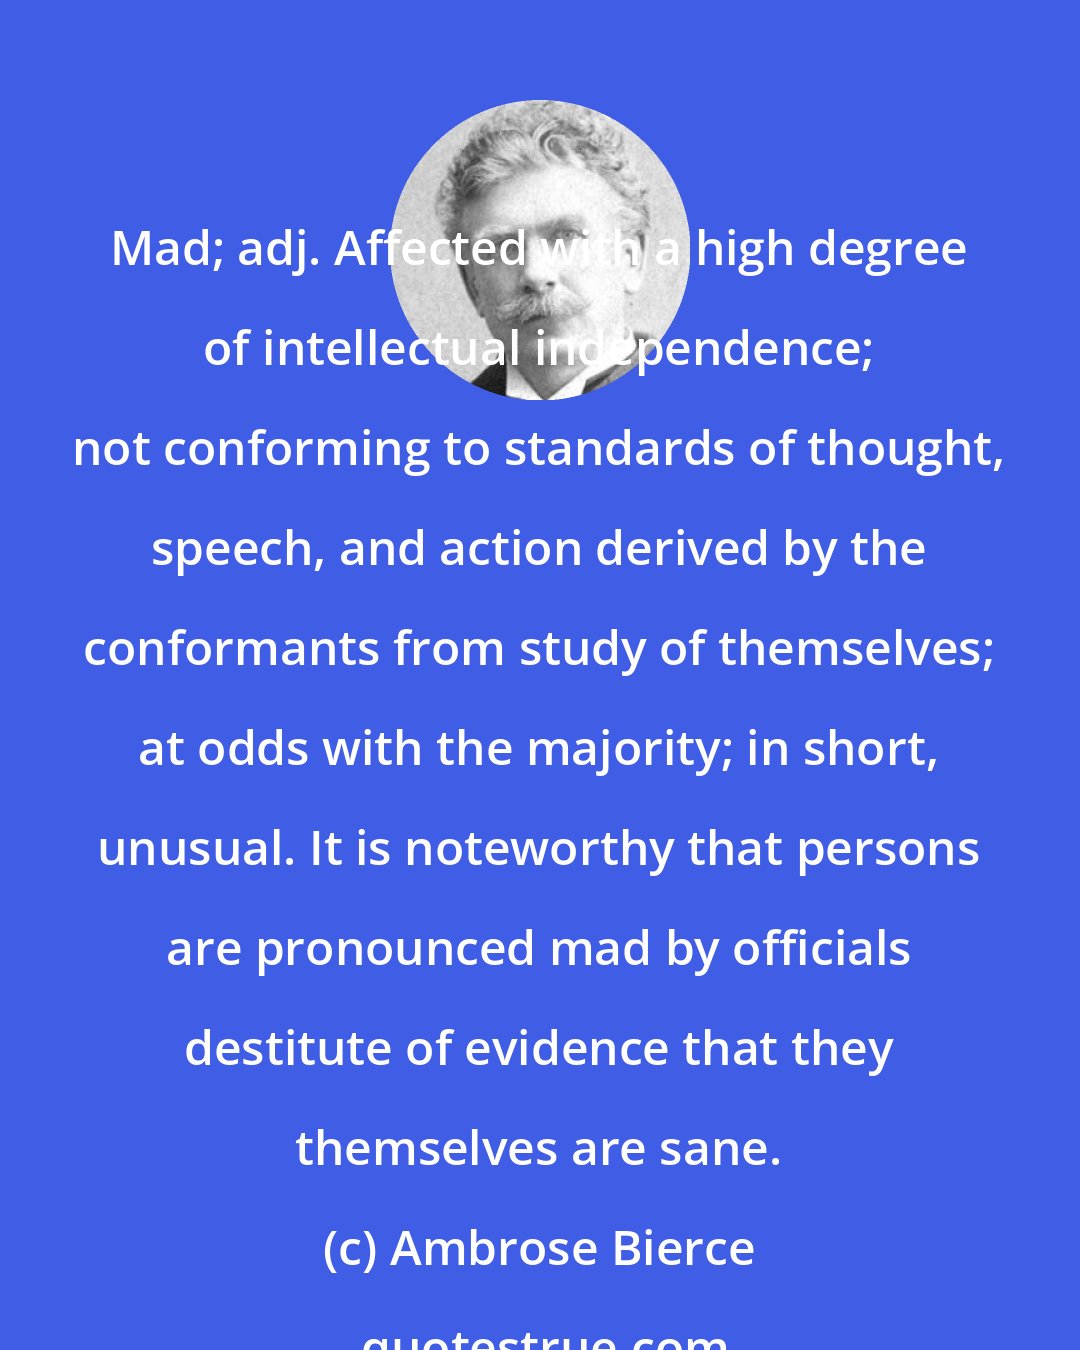 Ambrose Bierce: Mad; adj. Affected with a high degree of intellectual independence; not conforming to standards of thought, speech, and action derived by the conformants from study of themselves; at odds with the majority; in short, unusual. It is noteworthy that persons are pronounced mad by officials destitute of evidence that they themselves are sane.